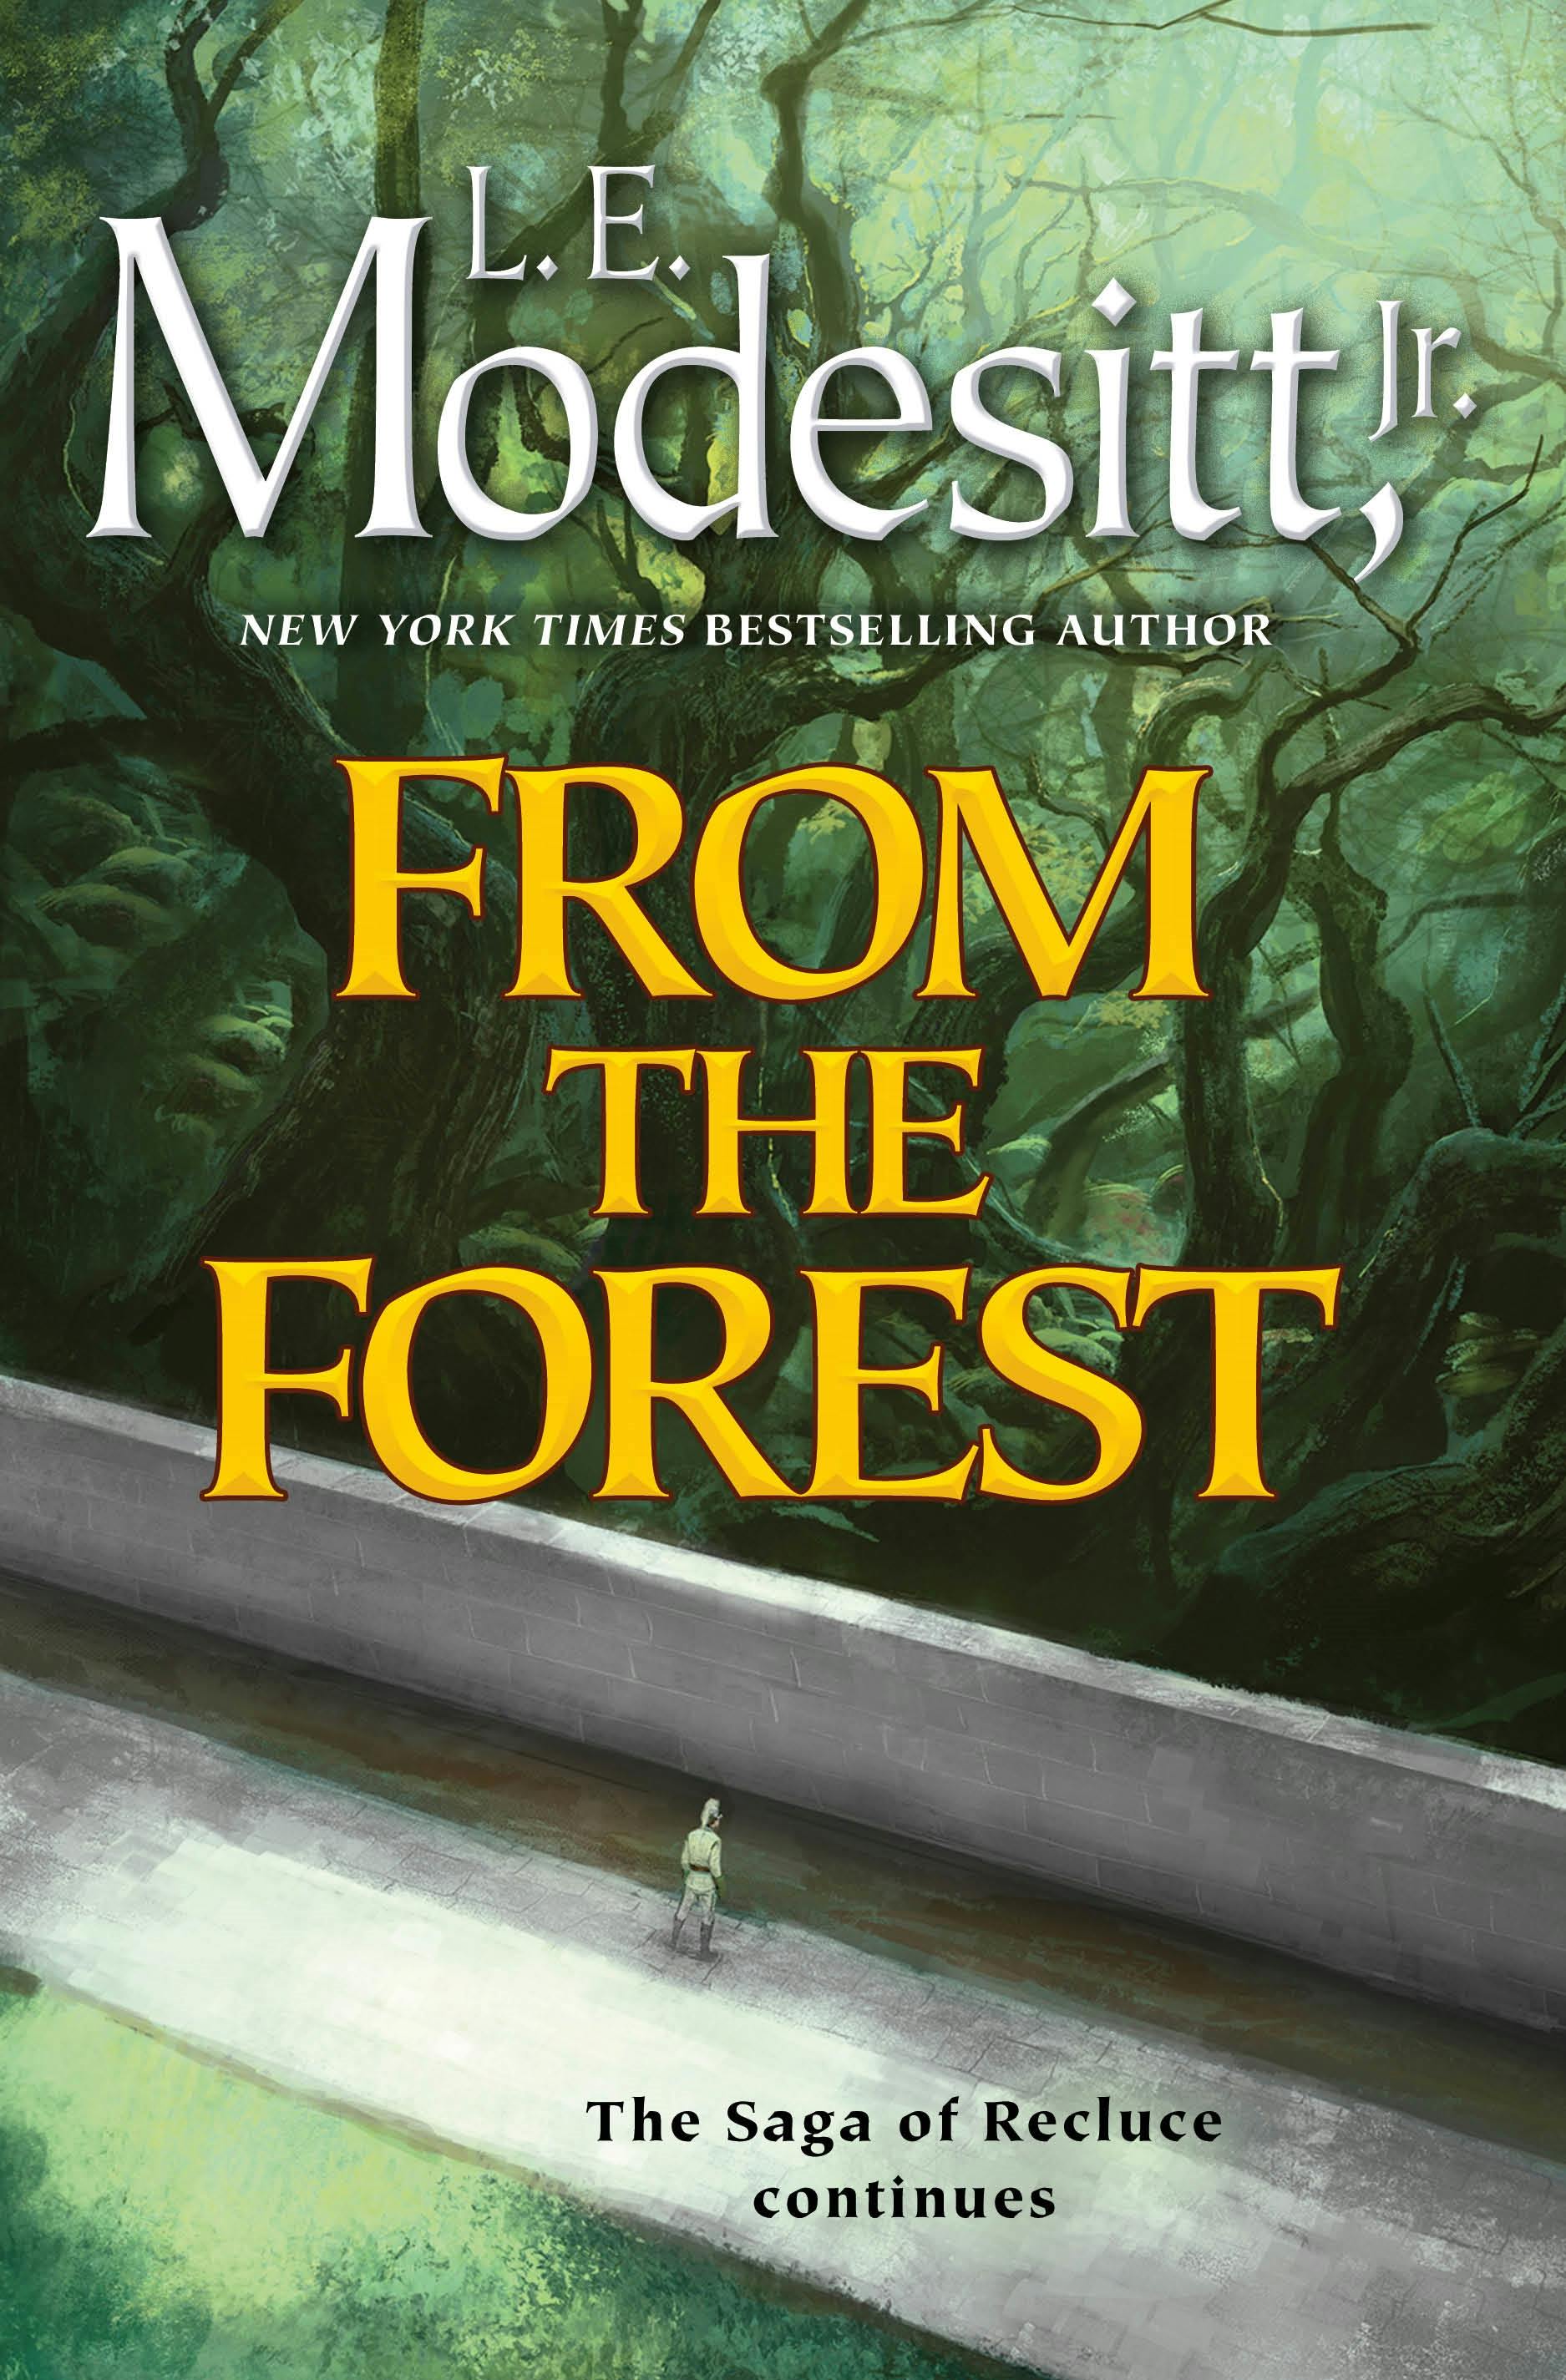 Cover for the book titled as: From the Forest